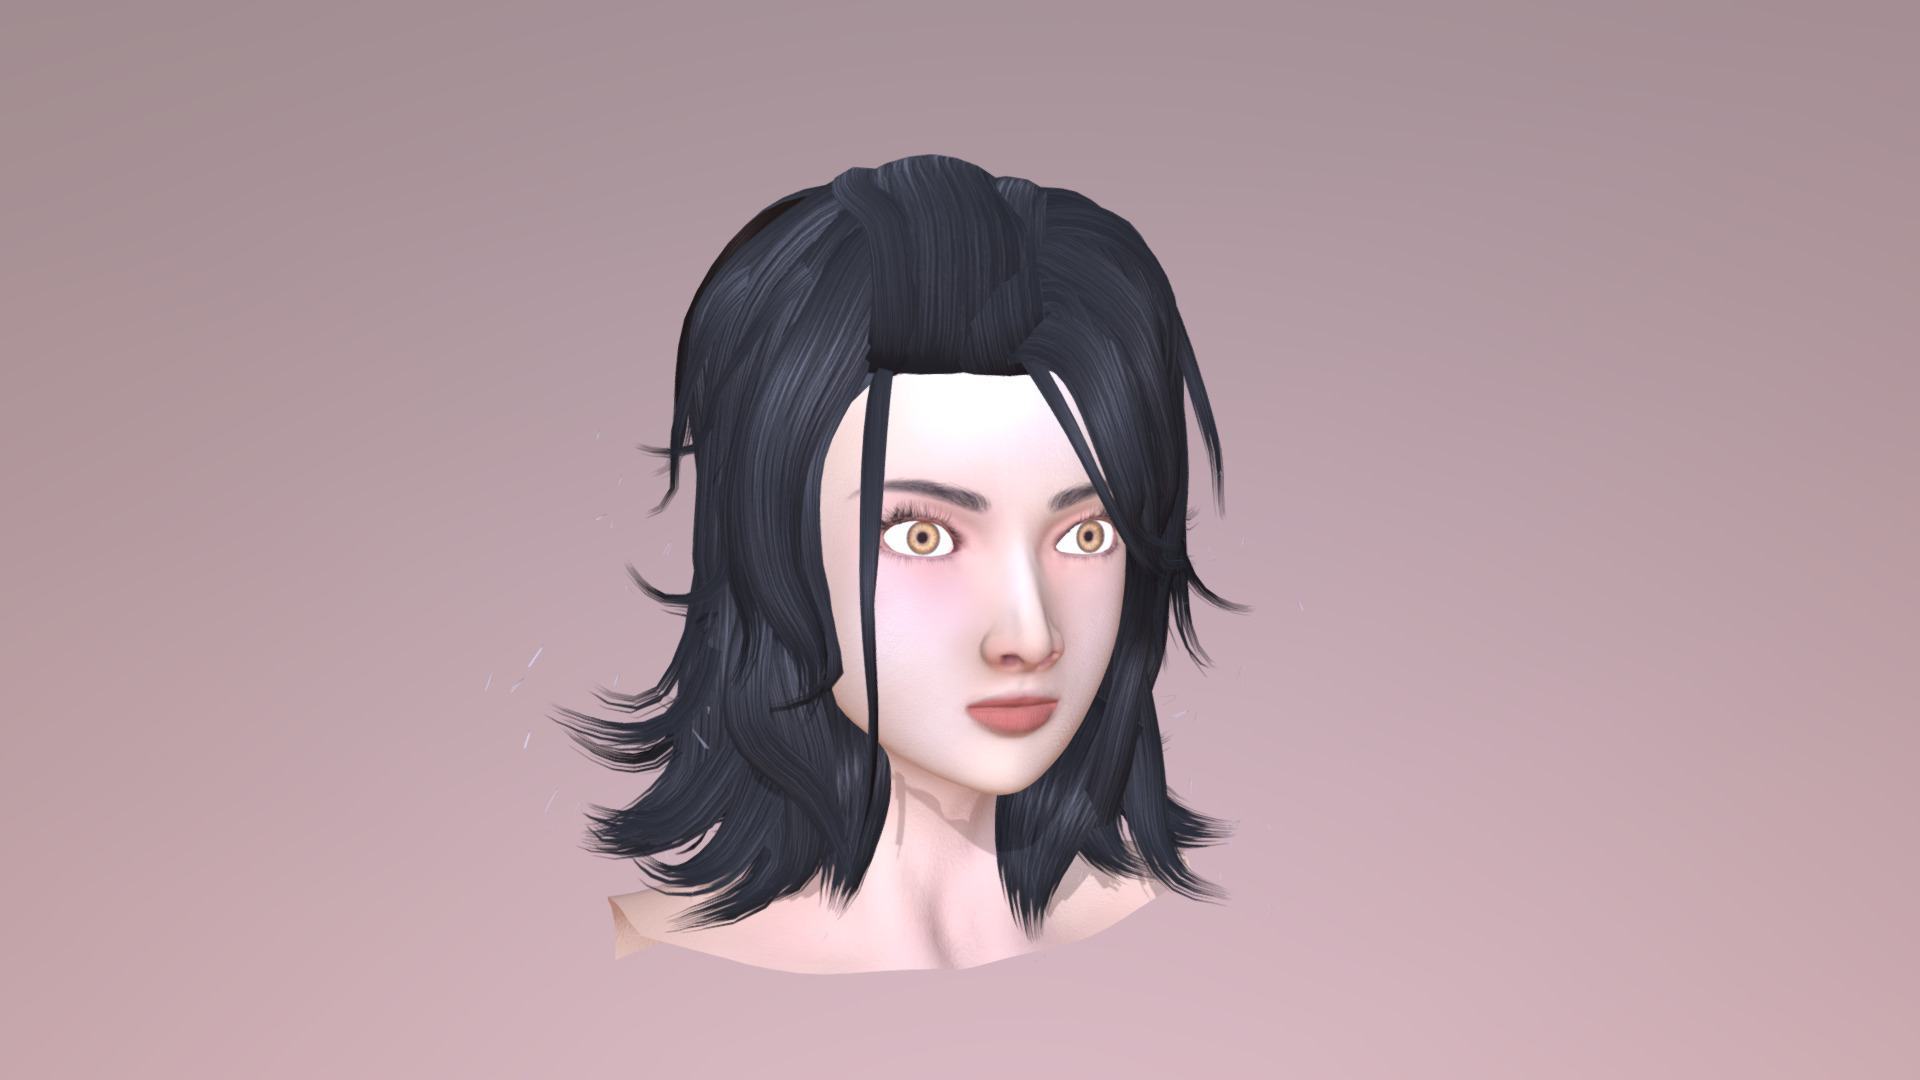 3D model Pocolov Hair 01 - This is a 3D model of the Pocolov Hair 01. The 3D model is about a person with black hair.